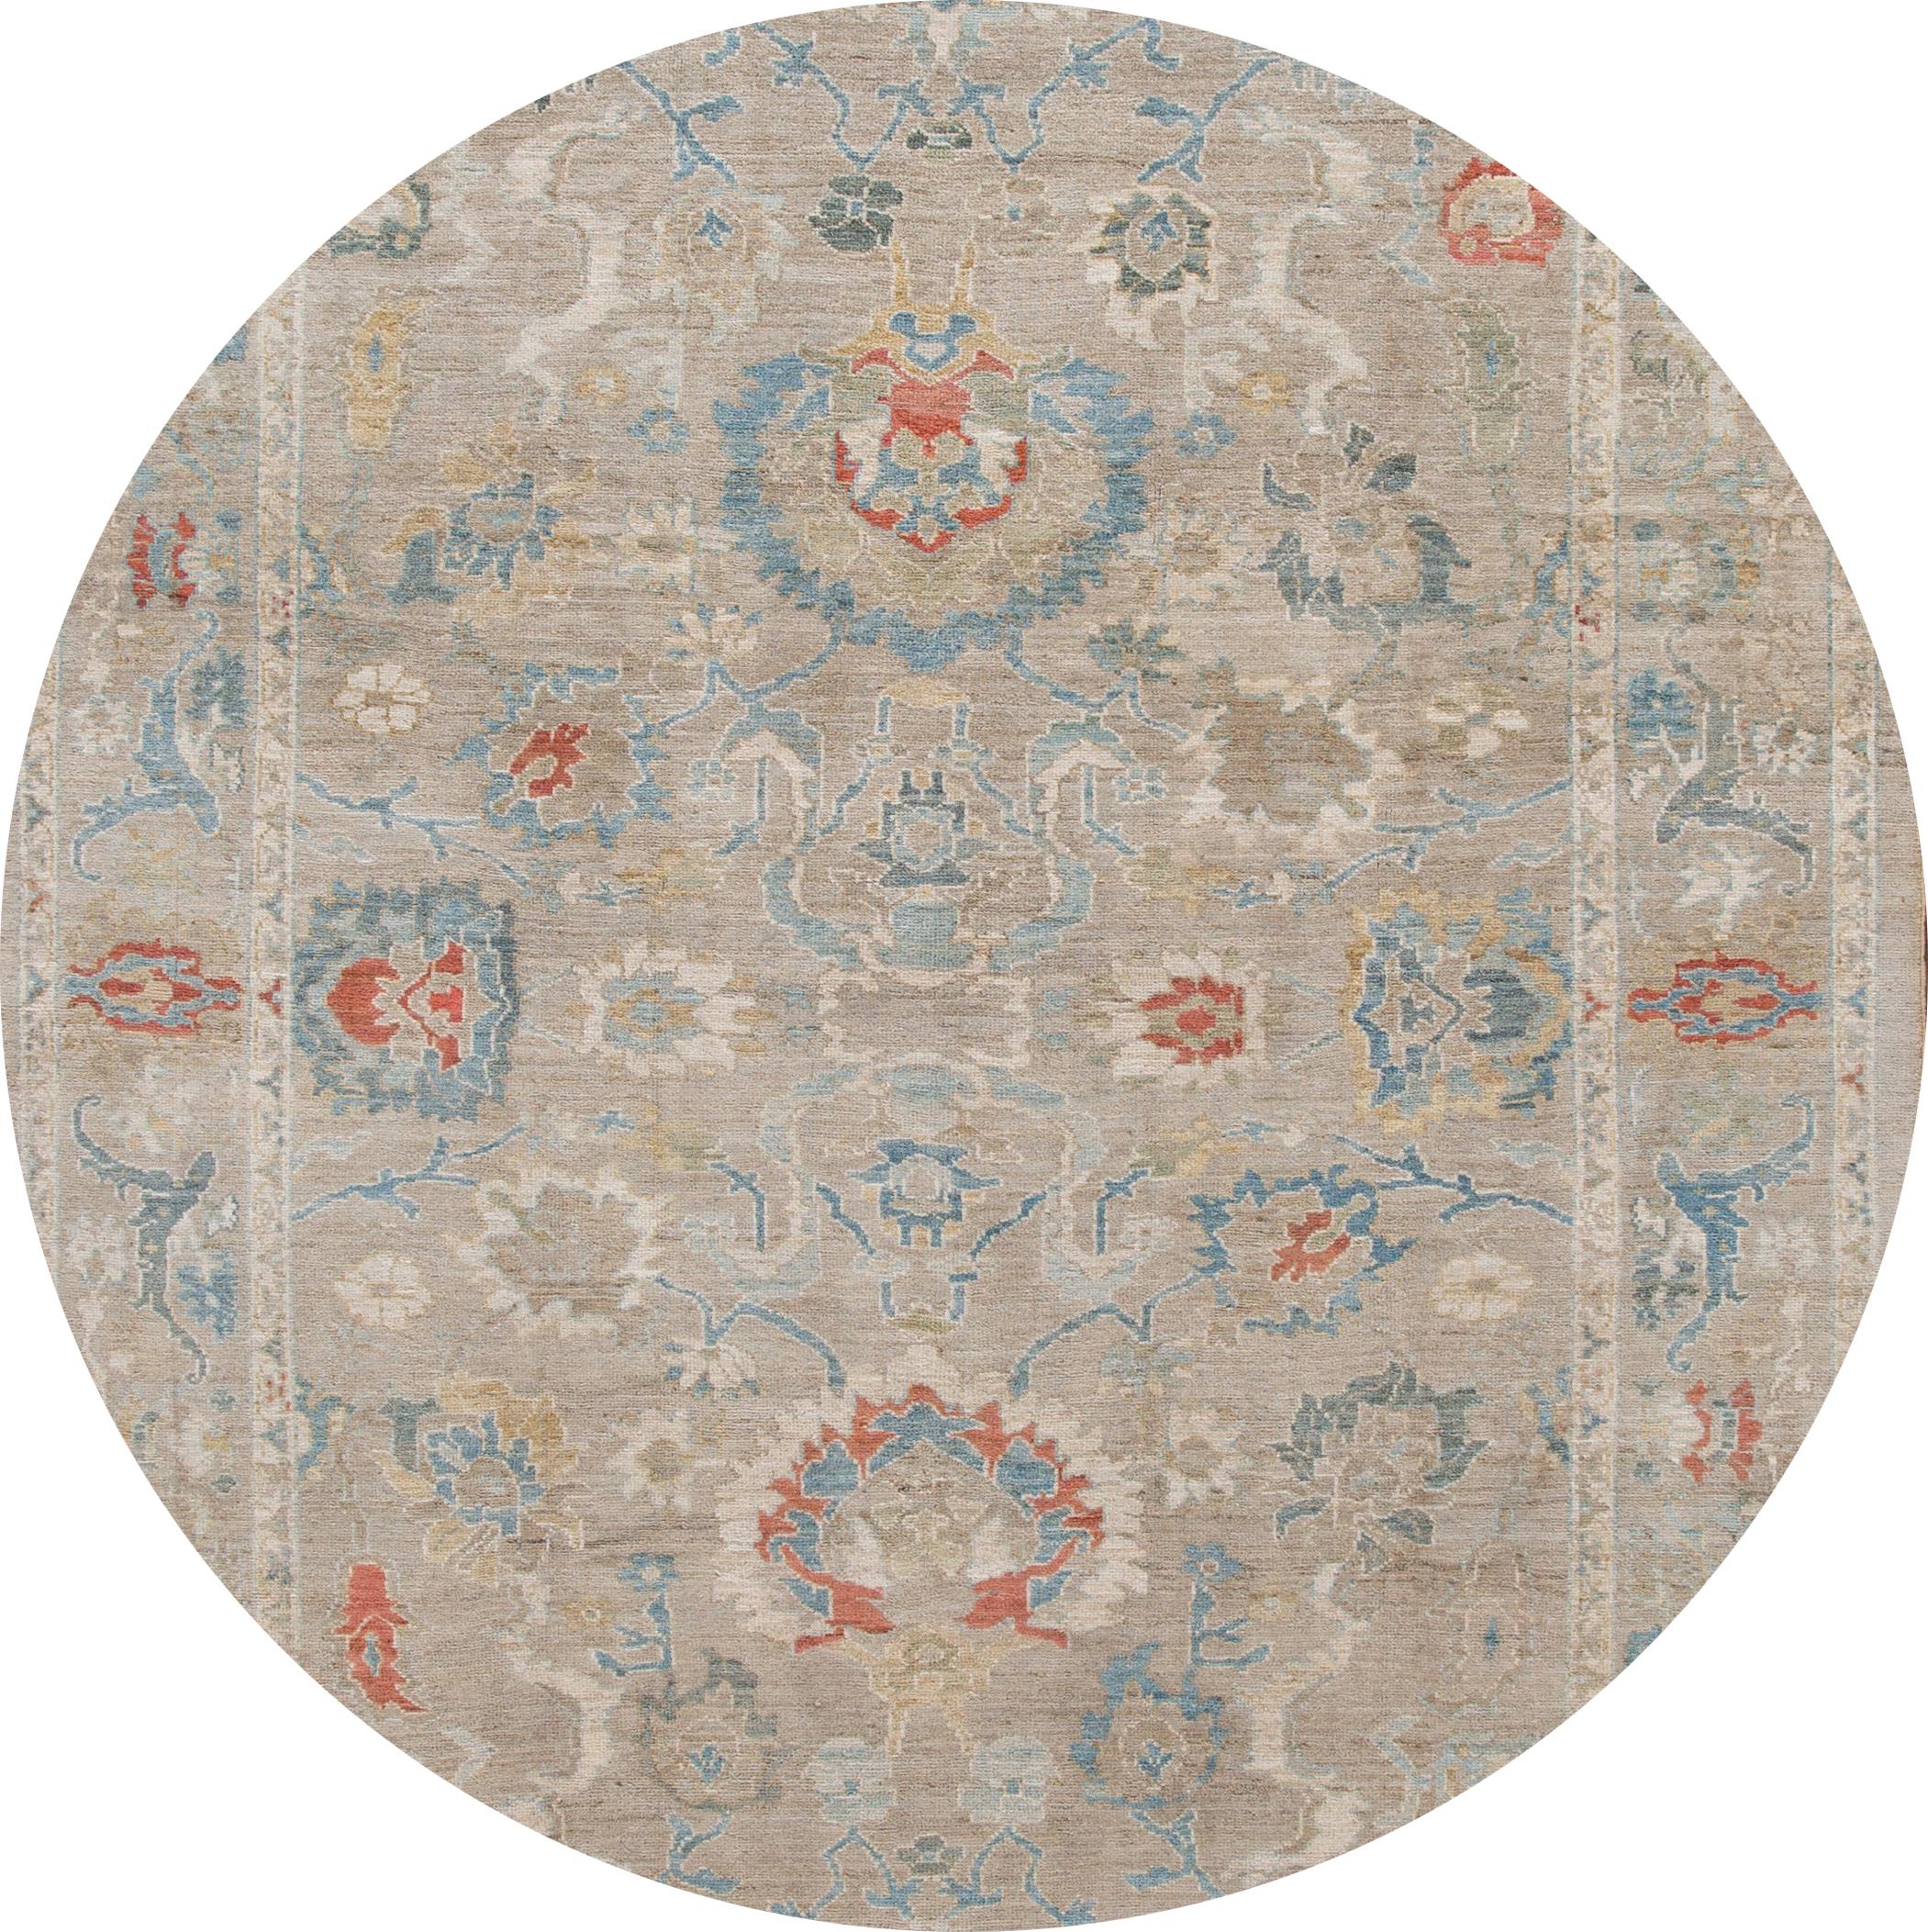 Beautiful contemporary Sultanabad rug, hand knotted wool with a gray field, and multi-color accents in all-over Classic floral medallion design.

This rug measures: 8'6